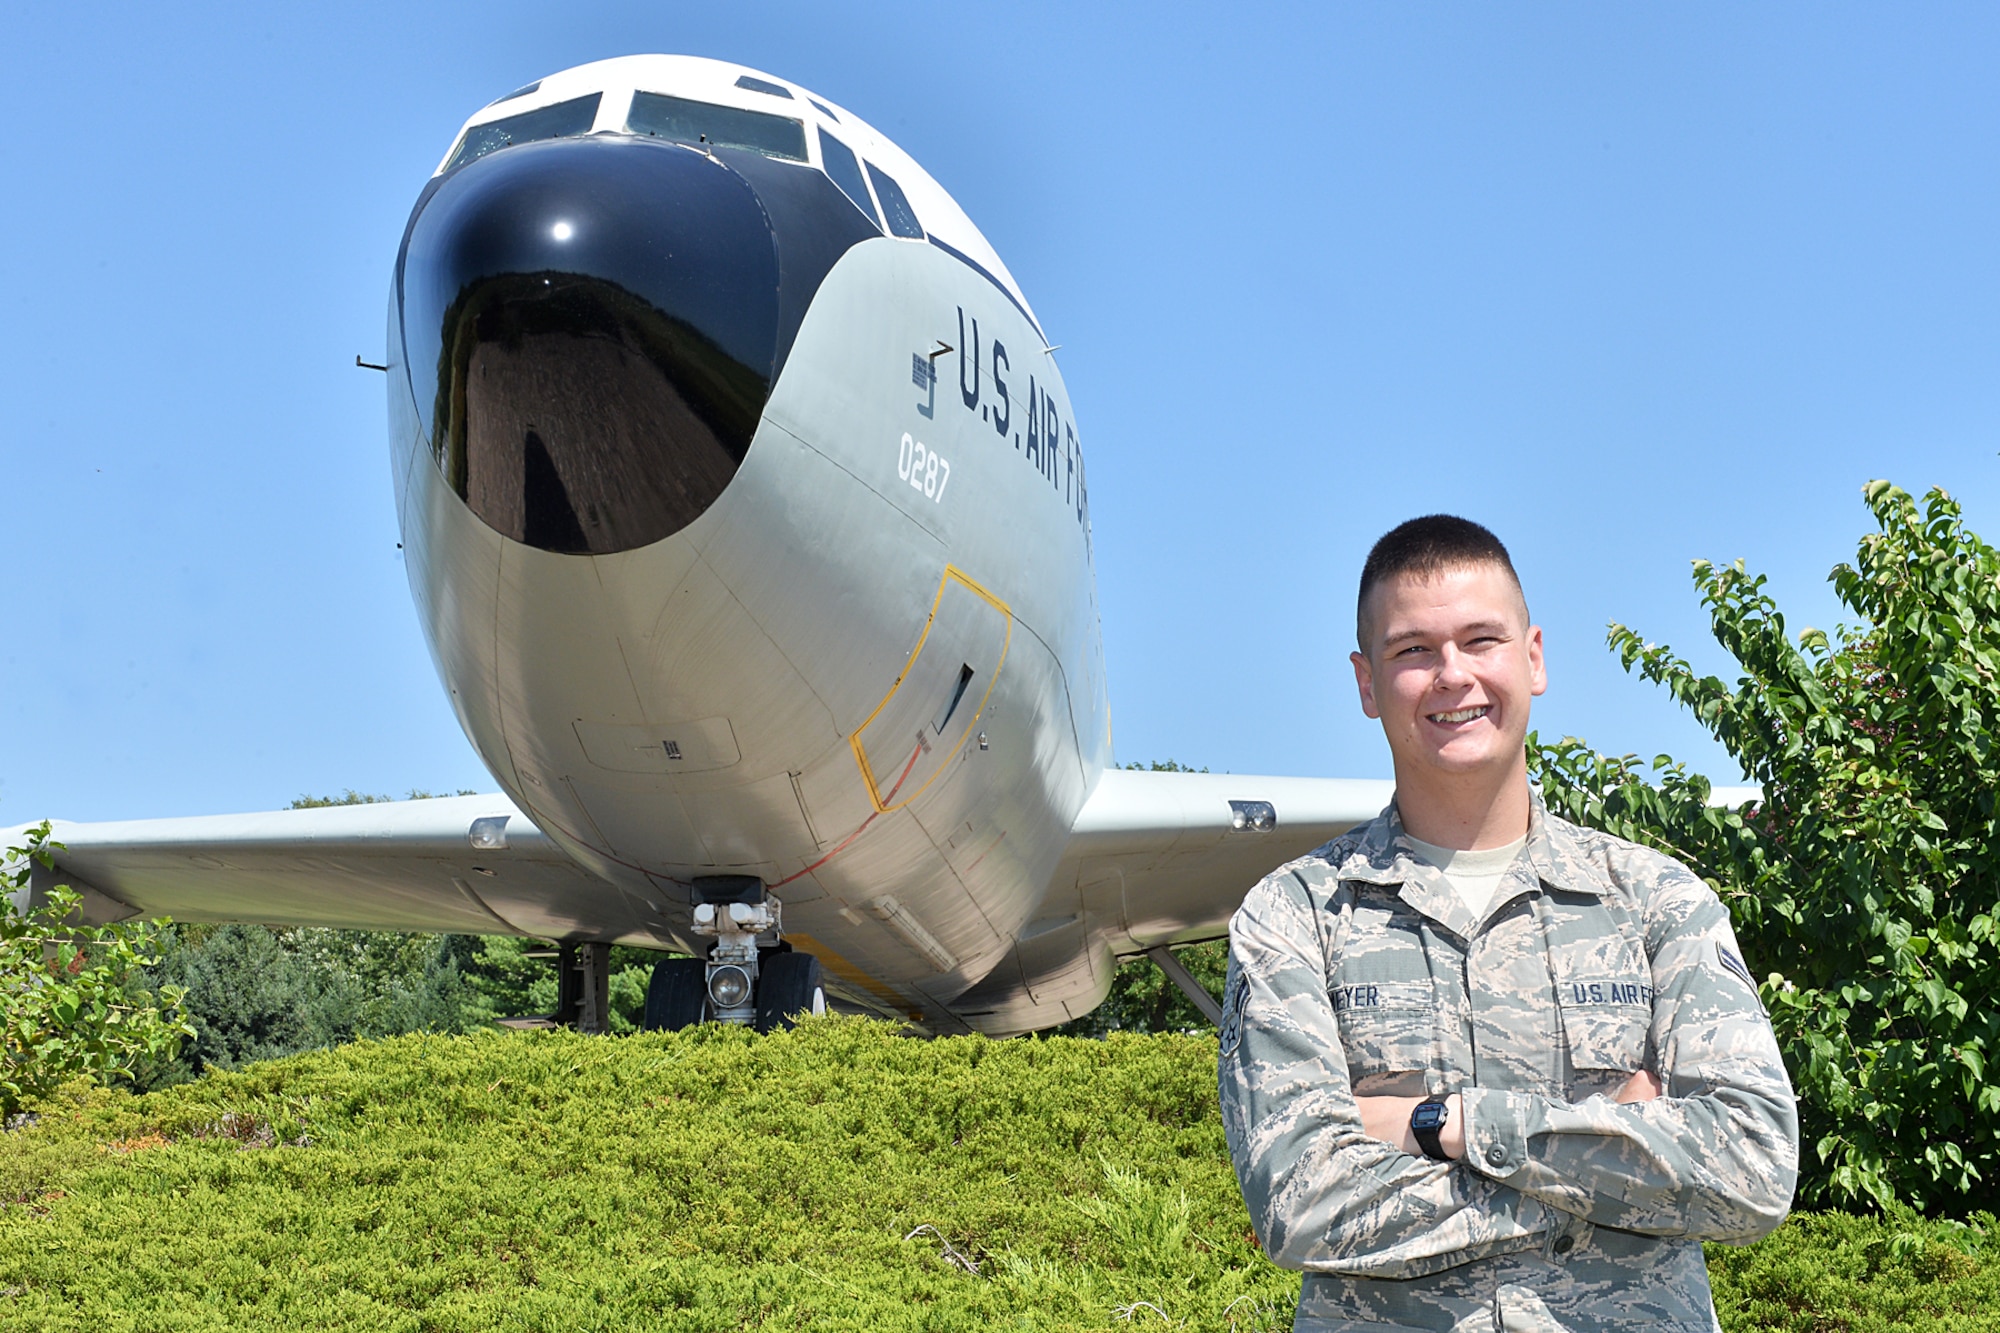 U.S. Air Force Airman 1st Class Daniel Meyer, 55th Aircraft Maintenance Squadron,  stands in front of an EC-135 Looking Glass static display Sept. 3. on Offutt Air Force Base, Neb.  Meyer has been at Offutt for a few months and has already made a lasting impression on his leadership. (U.S. Air Force photo by Charles Haymond)